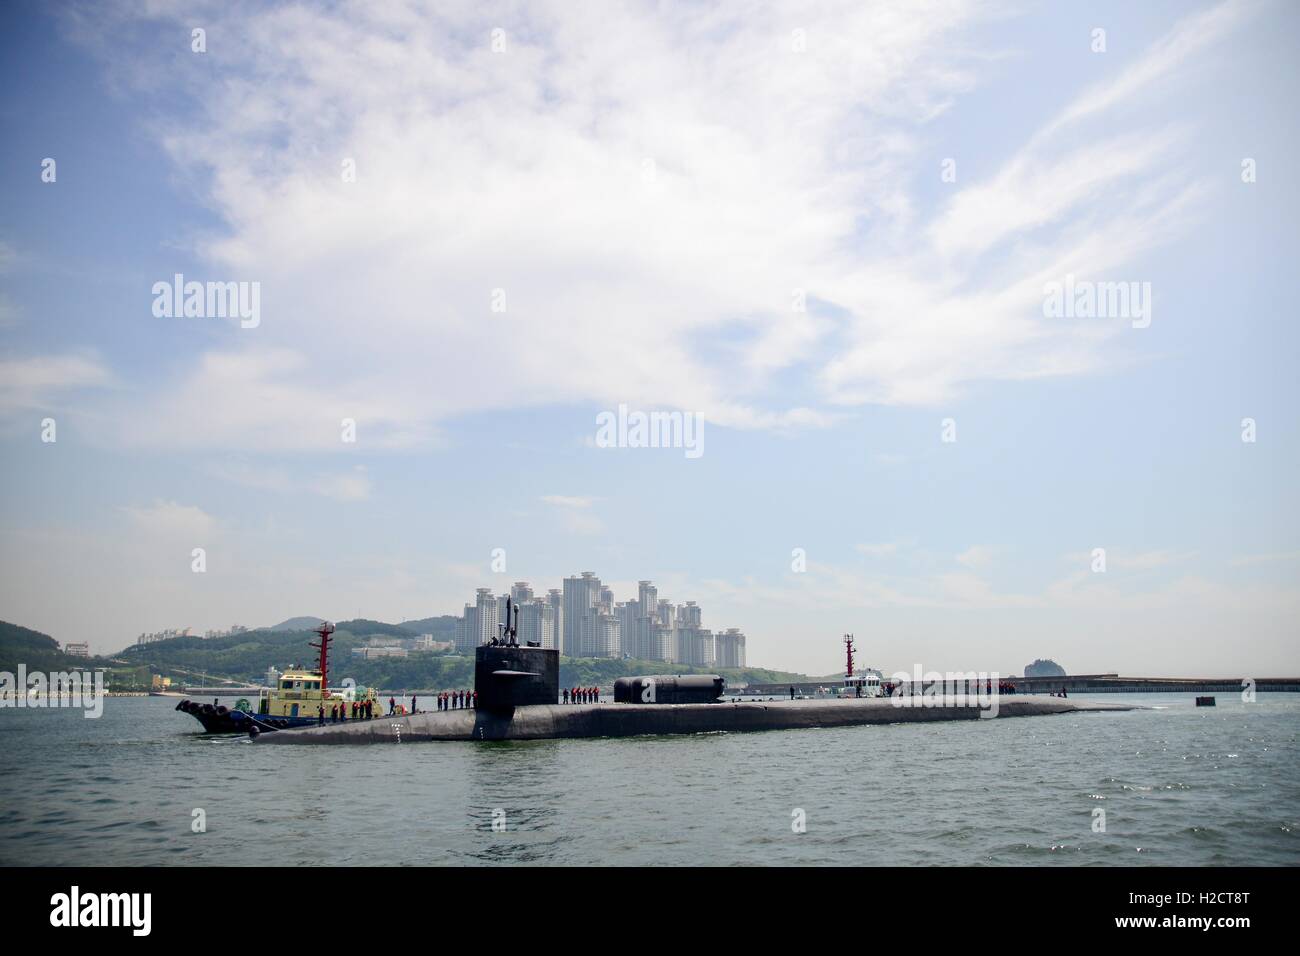 The USN Ohio-class nuclear-powered fleet ballistic guided-missile submarine USS Ohio arrives at the Republic of Korea Fleet Base for a regular port visit July 13, 2016 in Busan, Korea. Stock Photo